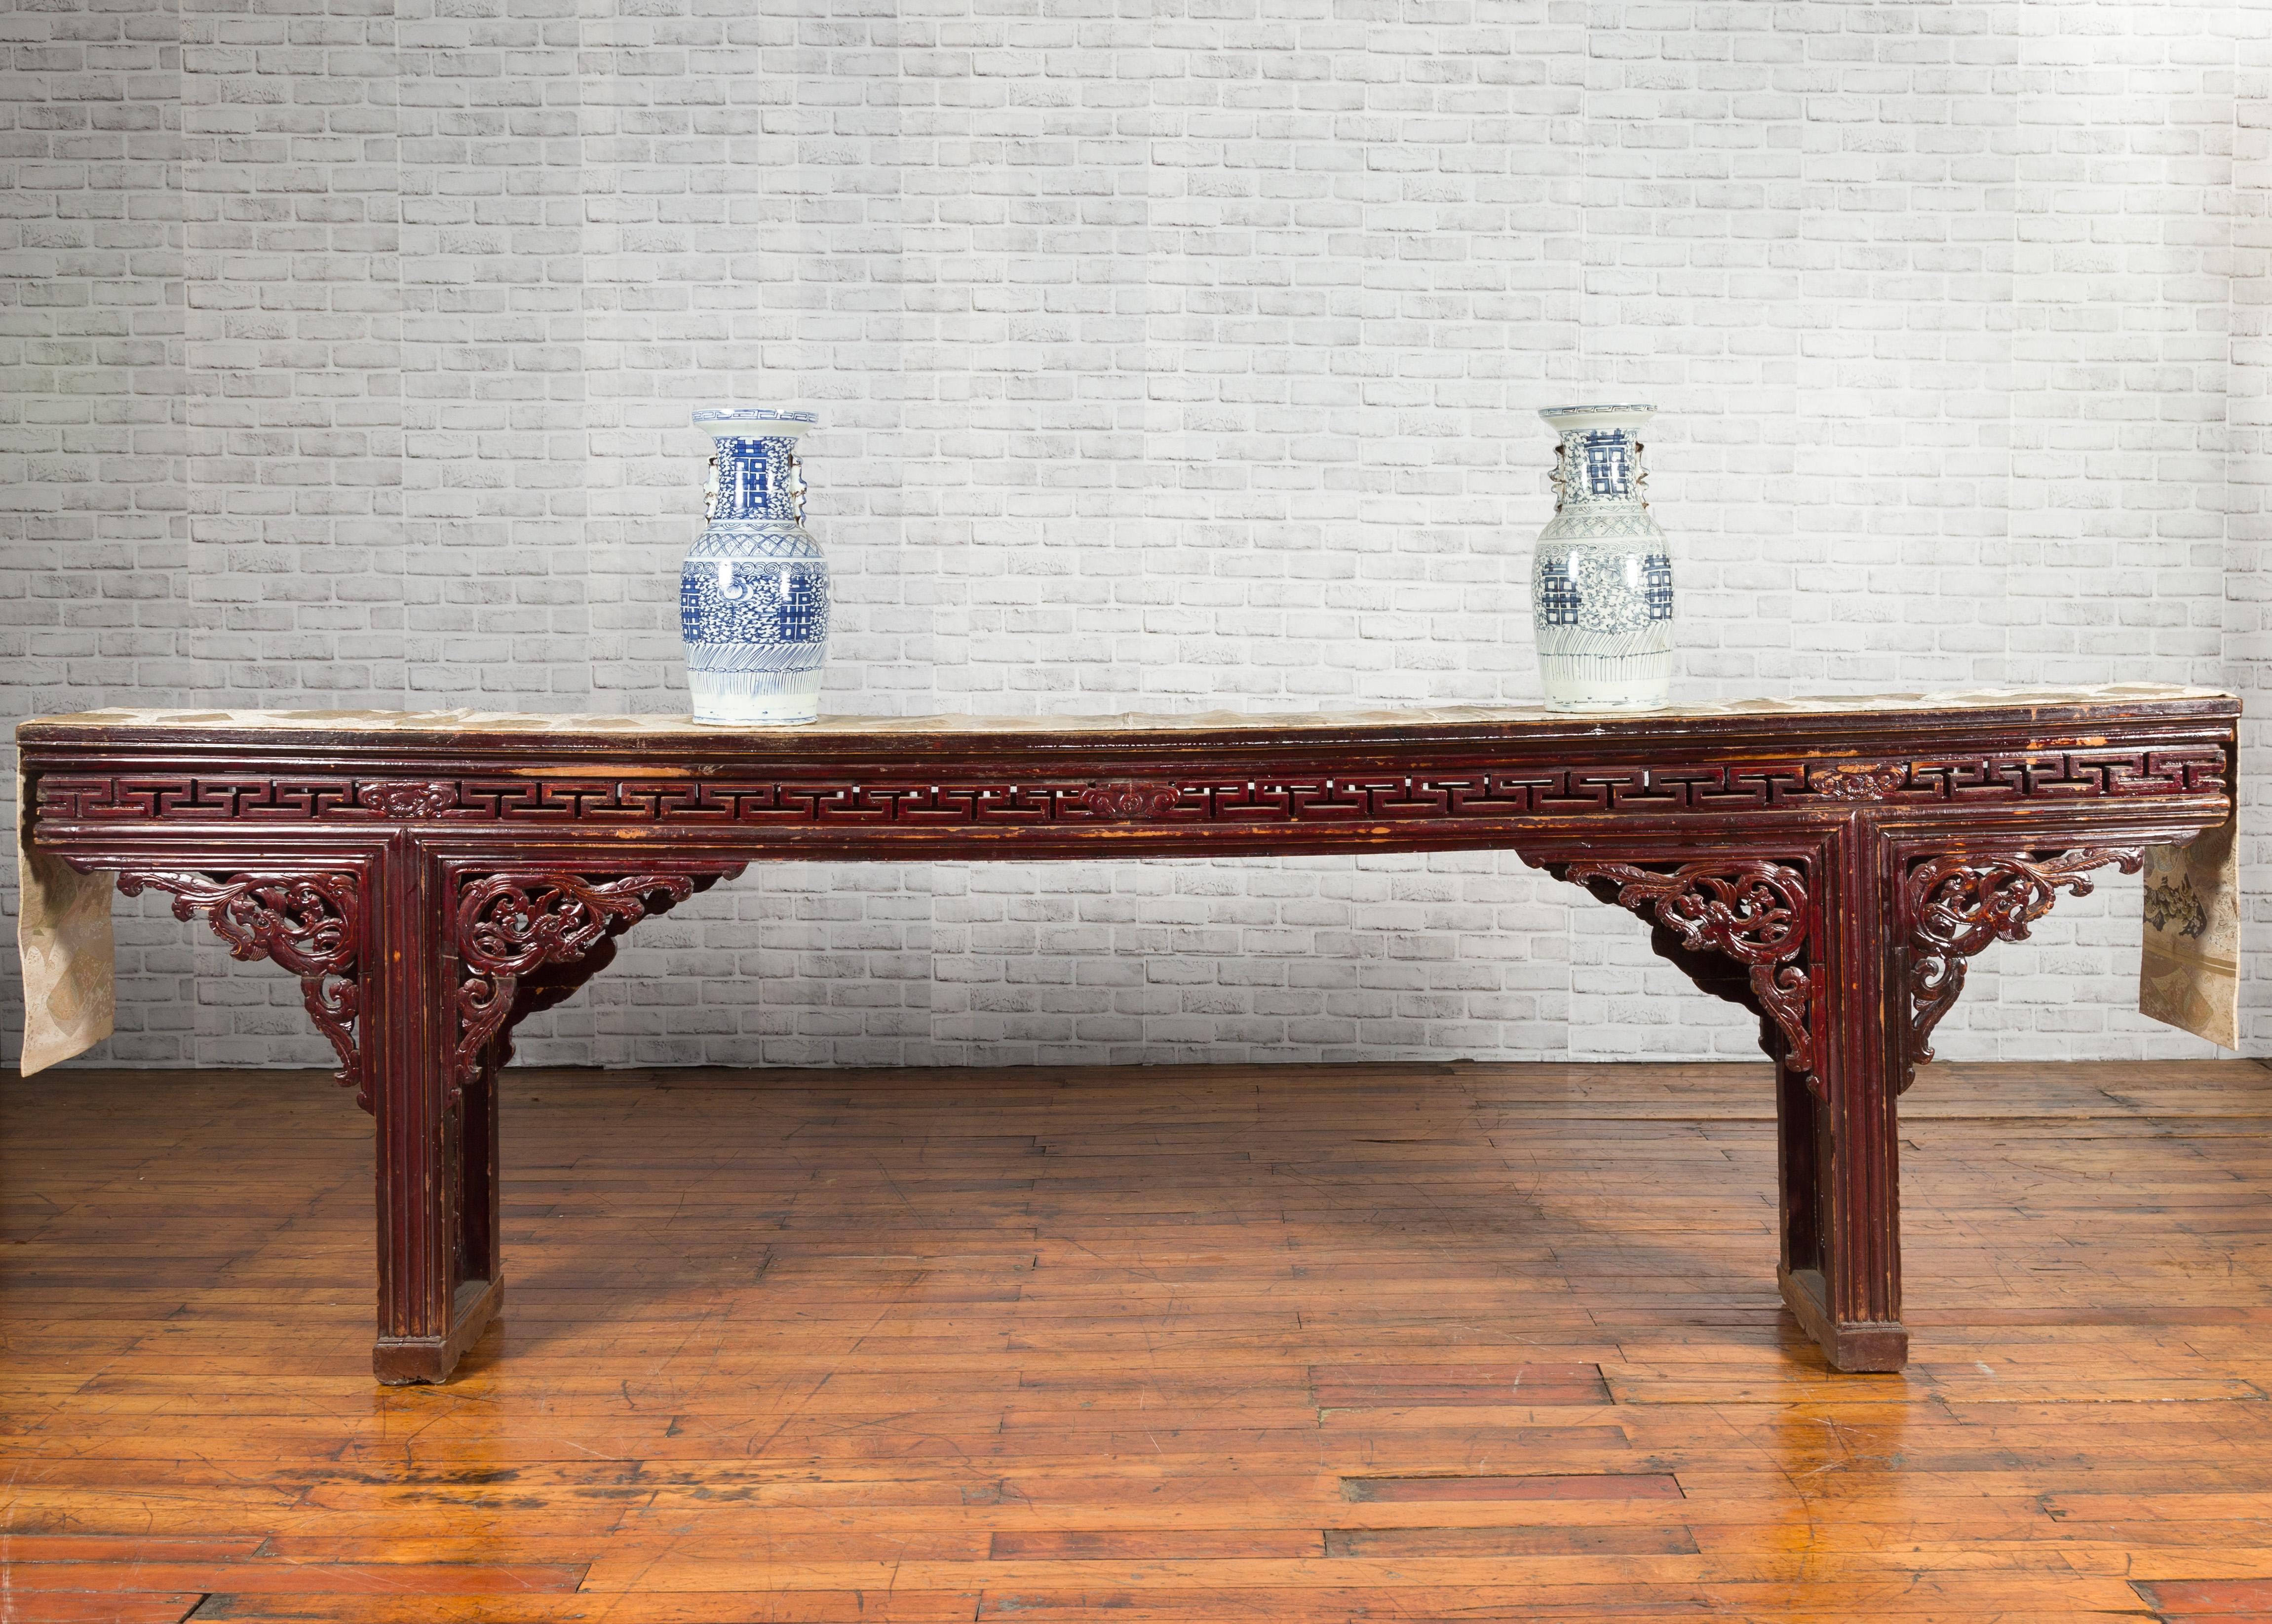 A large Chinese Qing Dynasty period altar console table from the 19th century, with fretwork and dragon motifs. Created in China during the Qing Dynasty period, this large altar console table features a narrow top sitting above an elegant apron